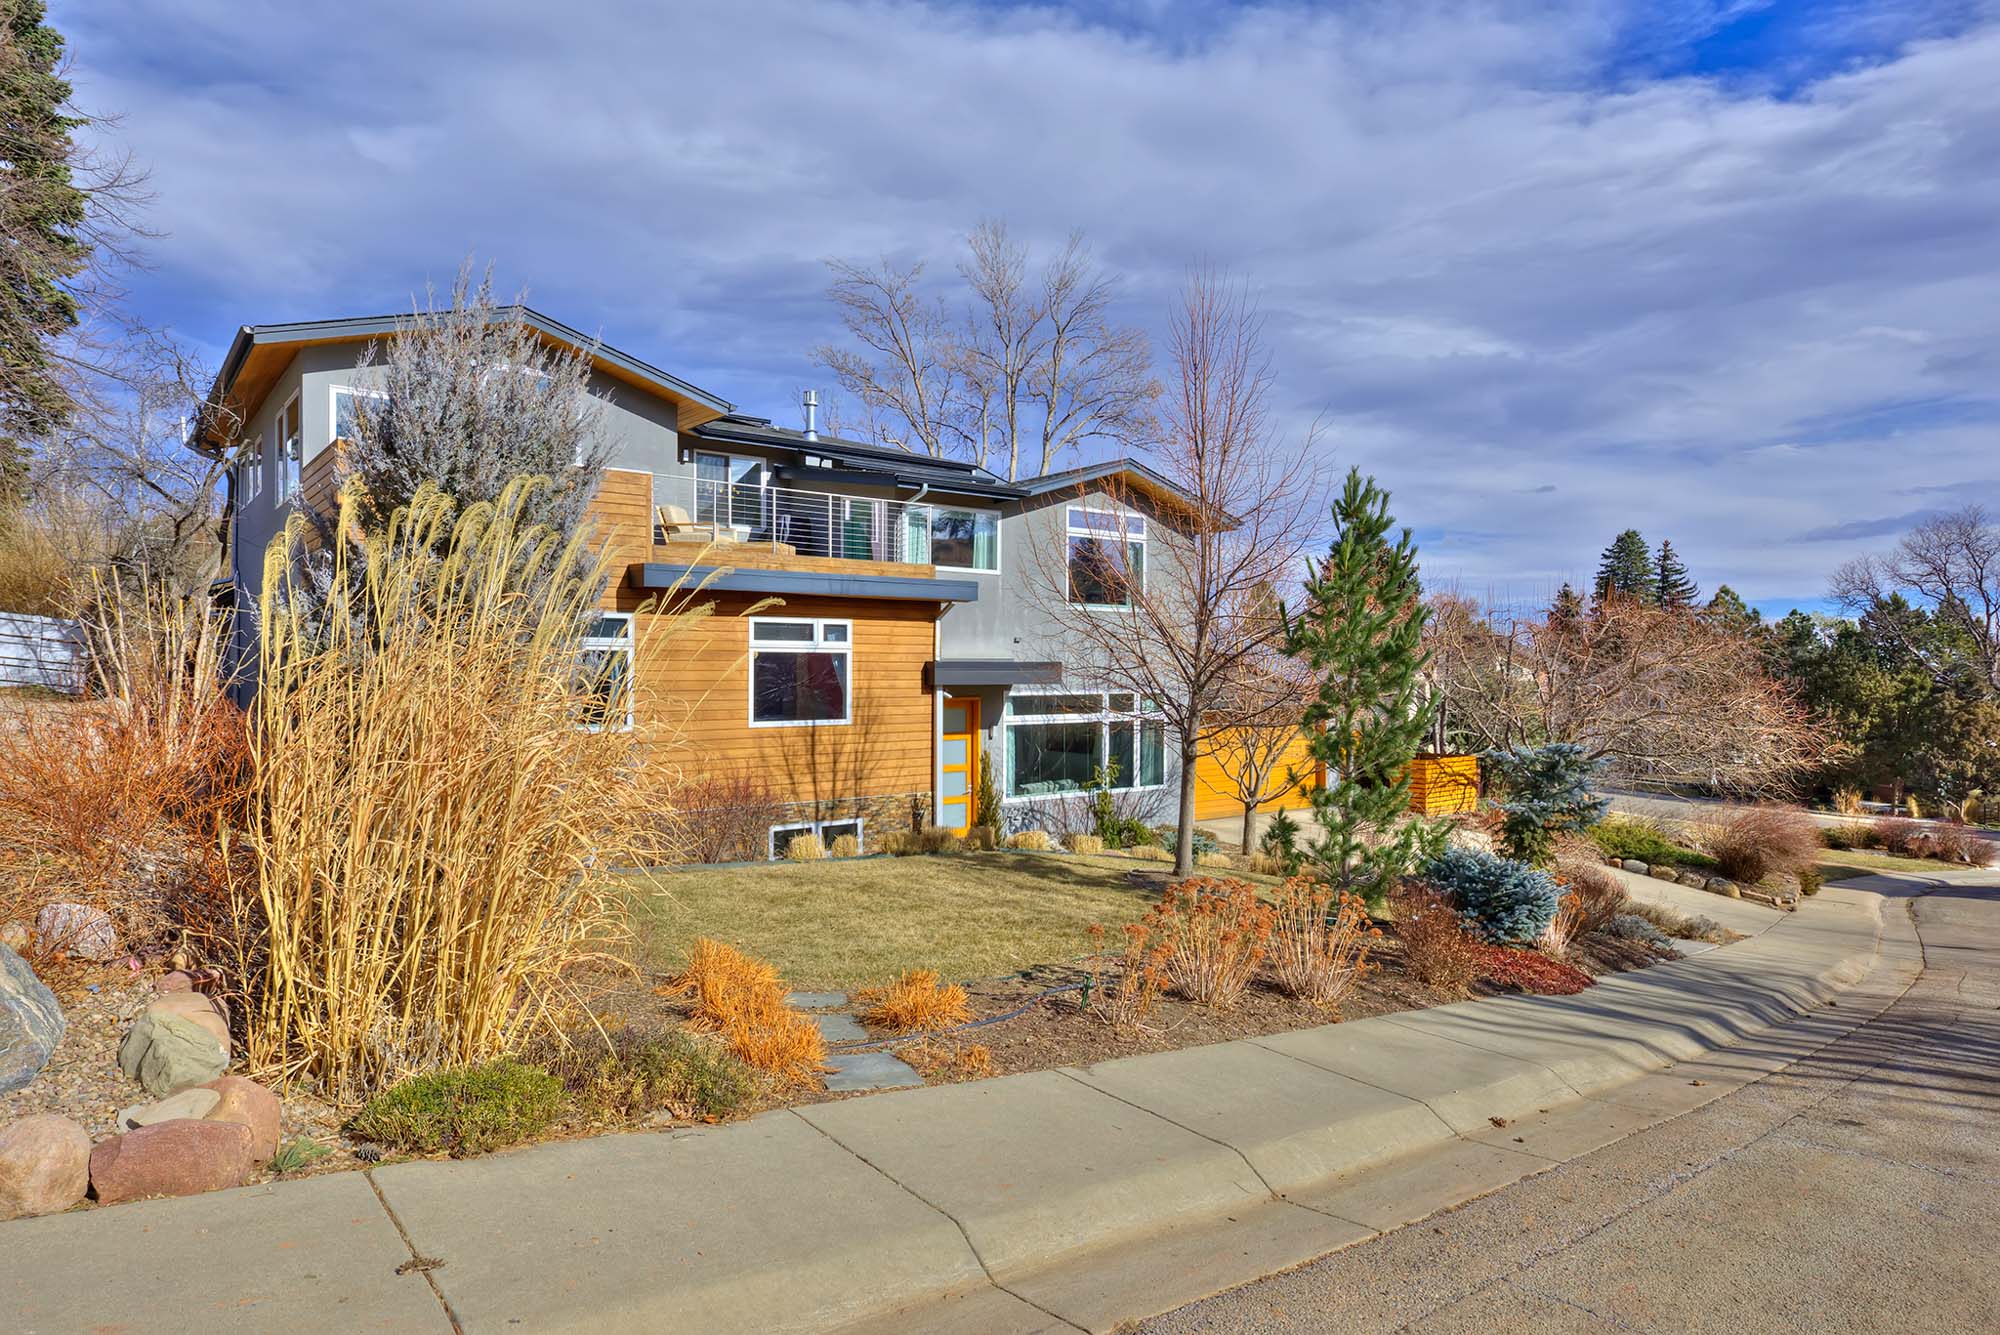 zachary-cornwell-photography-home-real-estate-denver-boulder